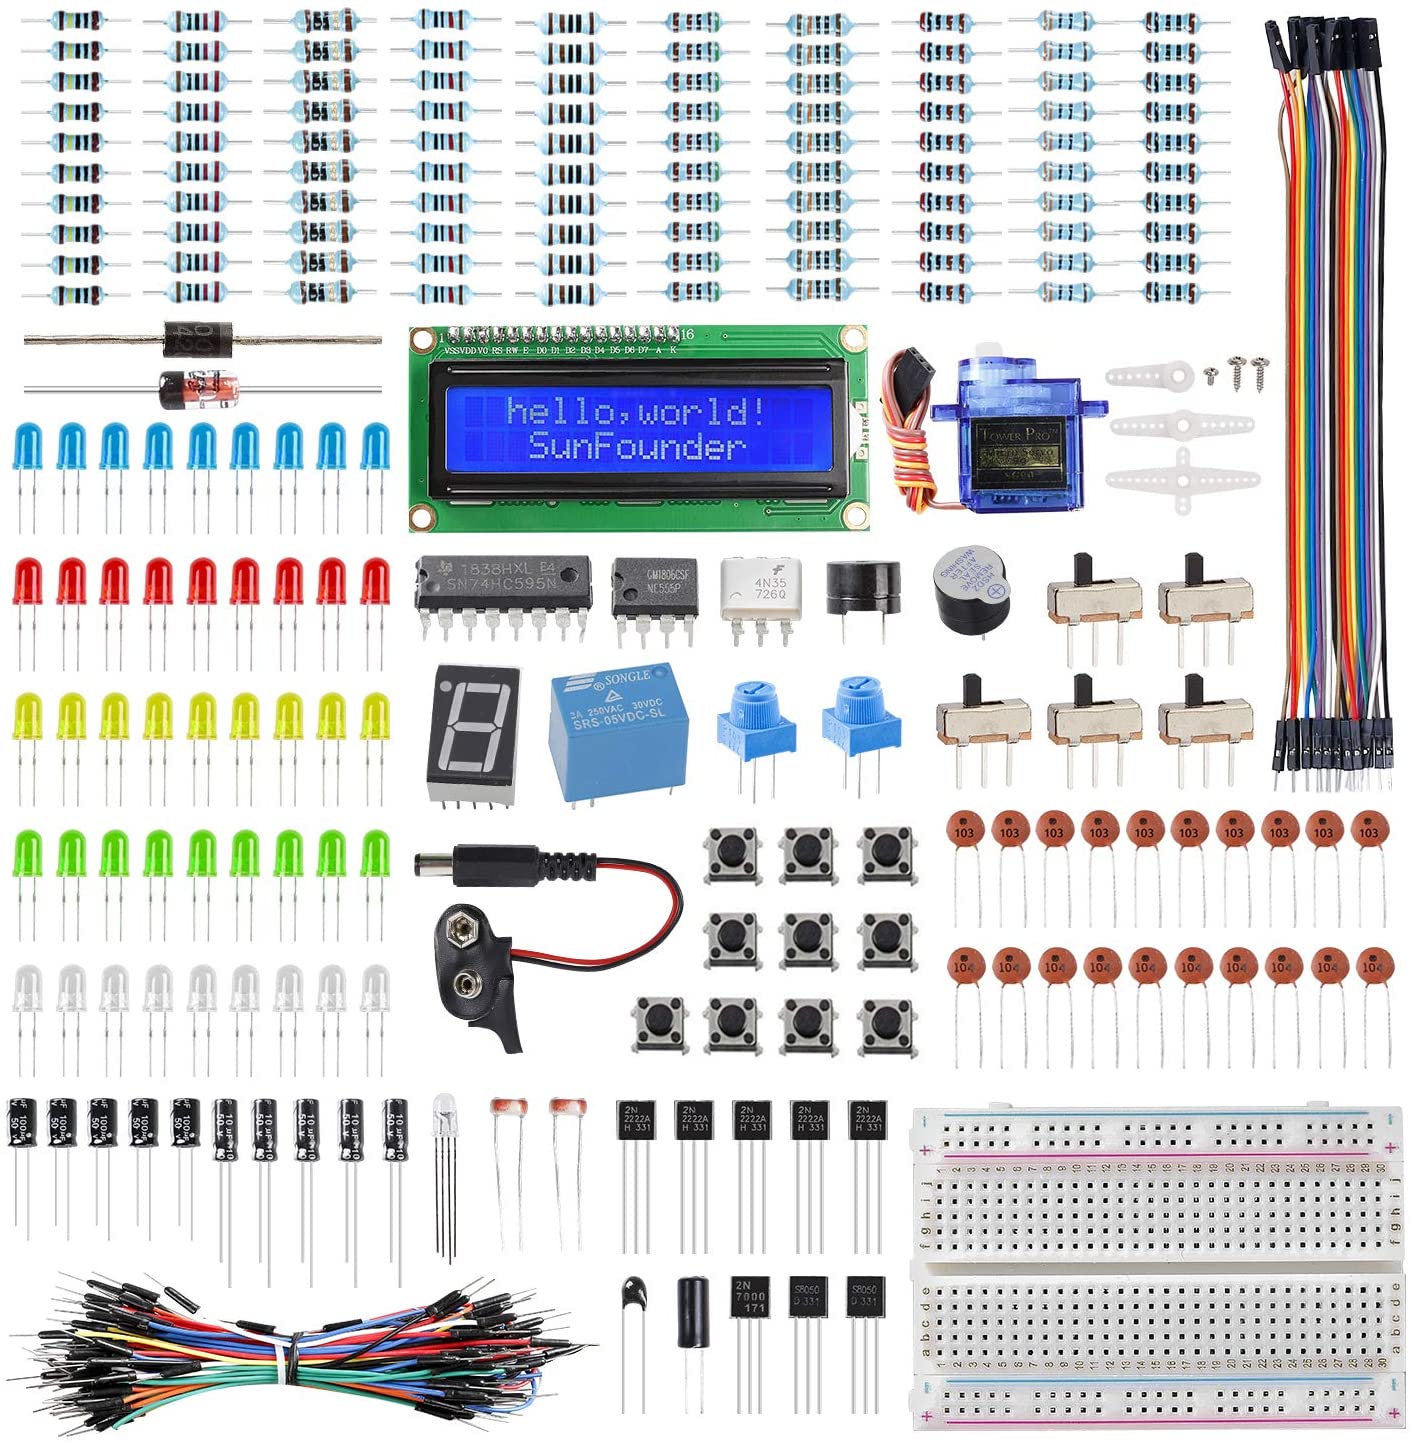 SunFounder Electronics Fun Kit with 1602 LCD Module,breadboard,LED,Resistor for Arduino R3 $17.99